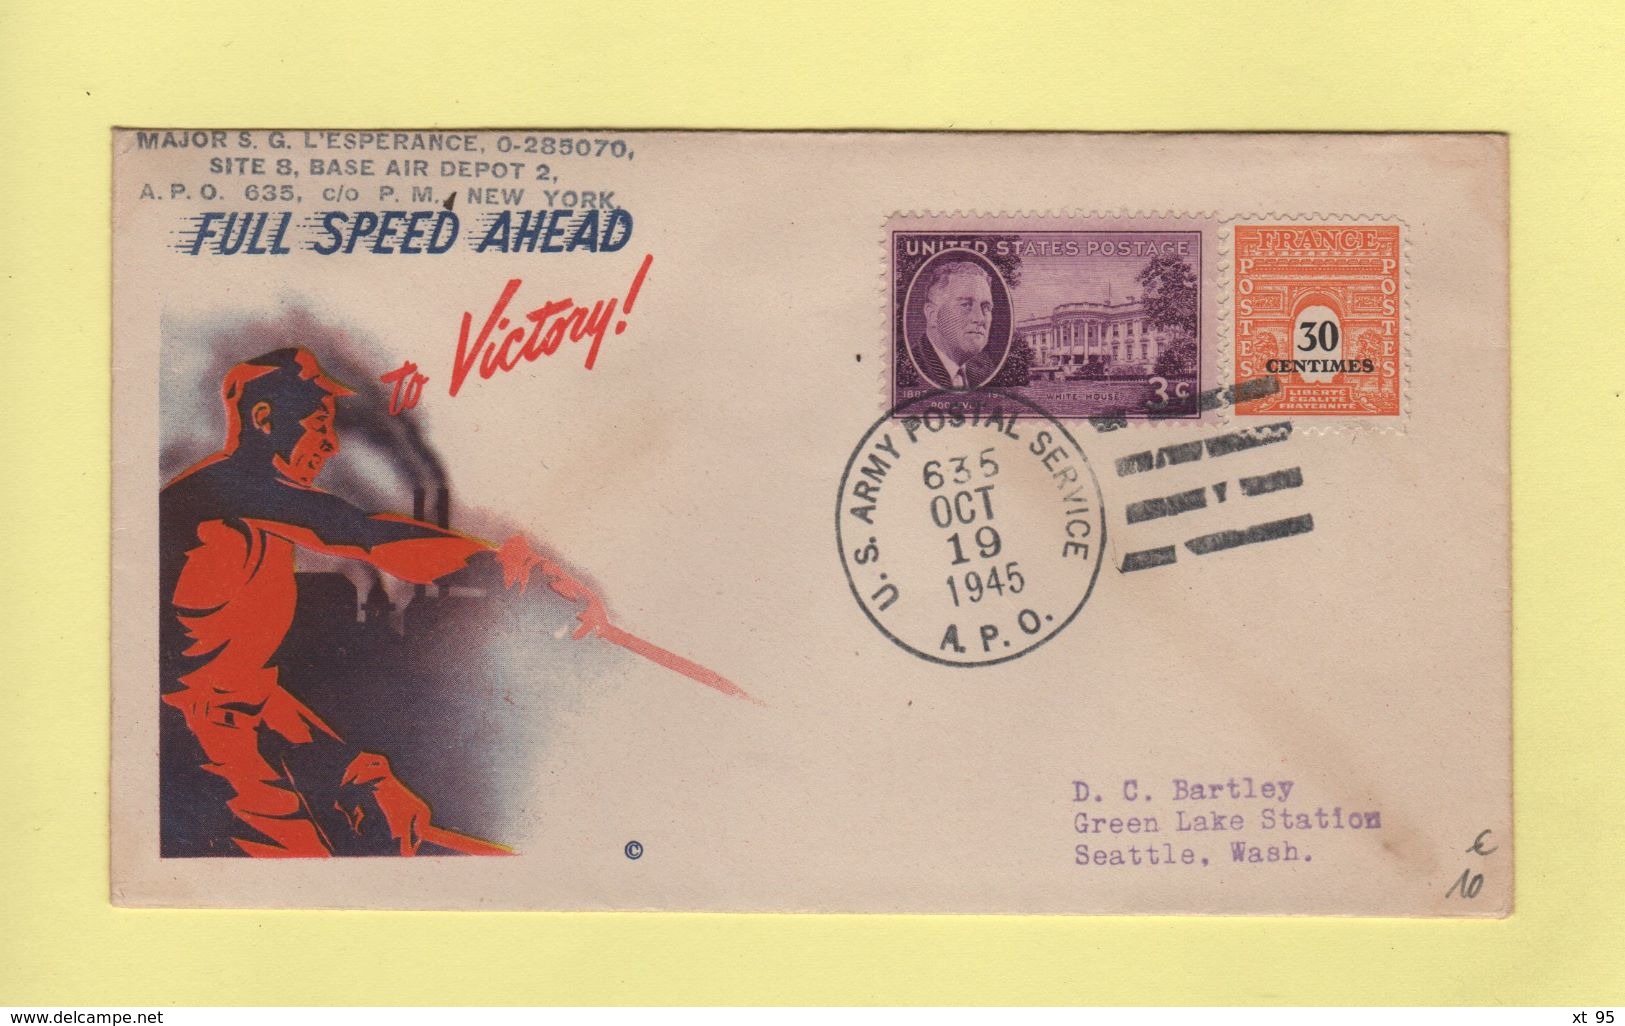 APO 635 - US Postal Army Service - 19 Oct 1945 - Mixte US France - Full Speed Ahead For Victory - Guerra Del 1939-45